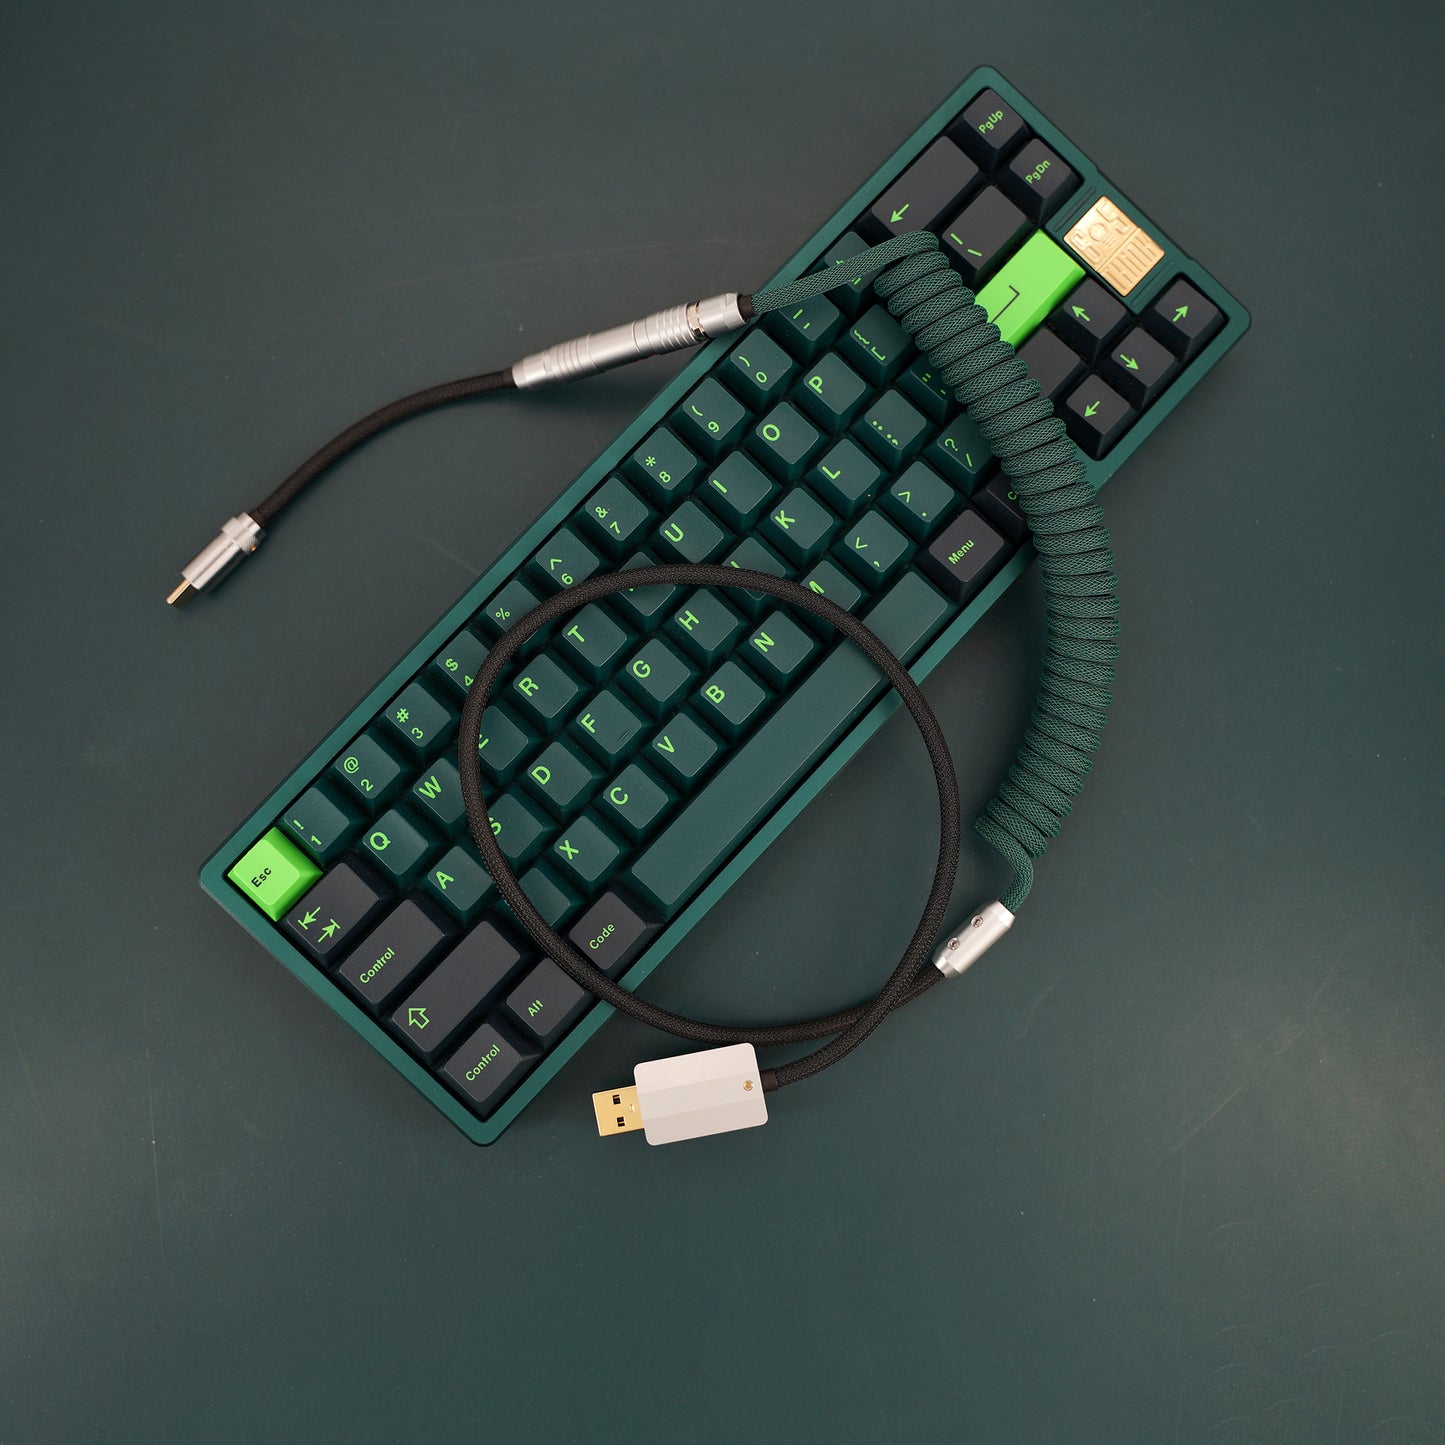 Sleeved Coiled Keyboard Aviator Cable, Lemo Style Connector - Dark Green/Black